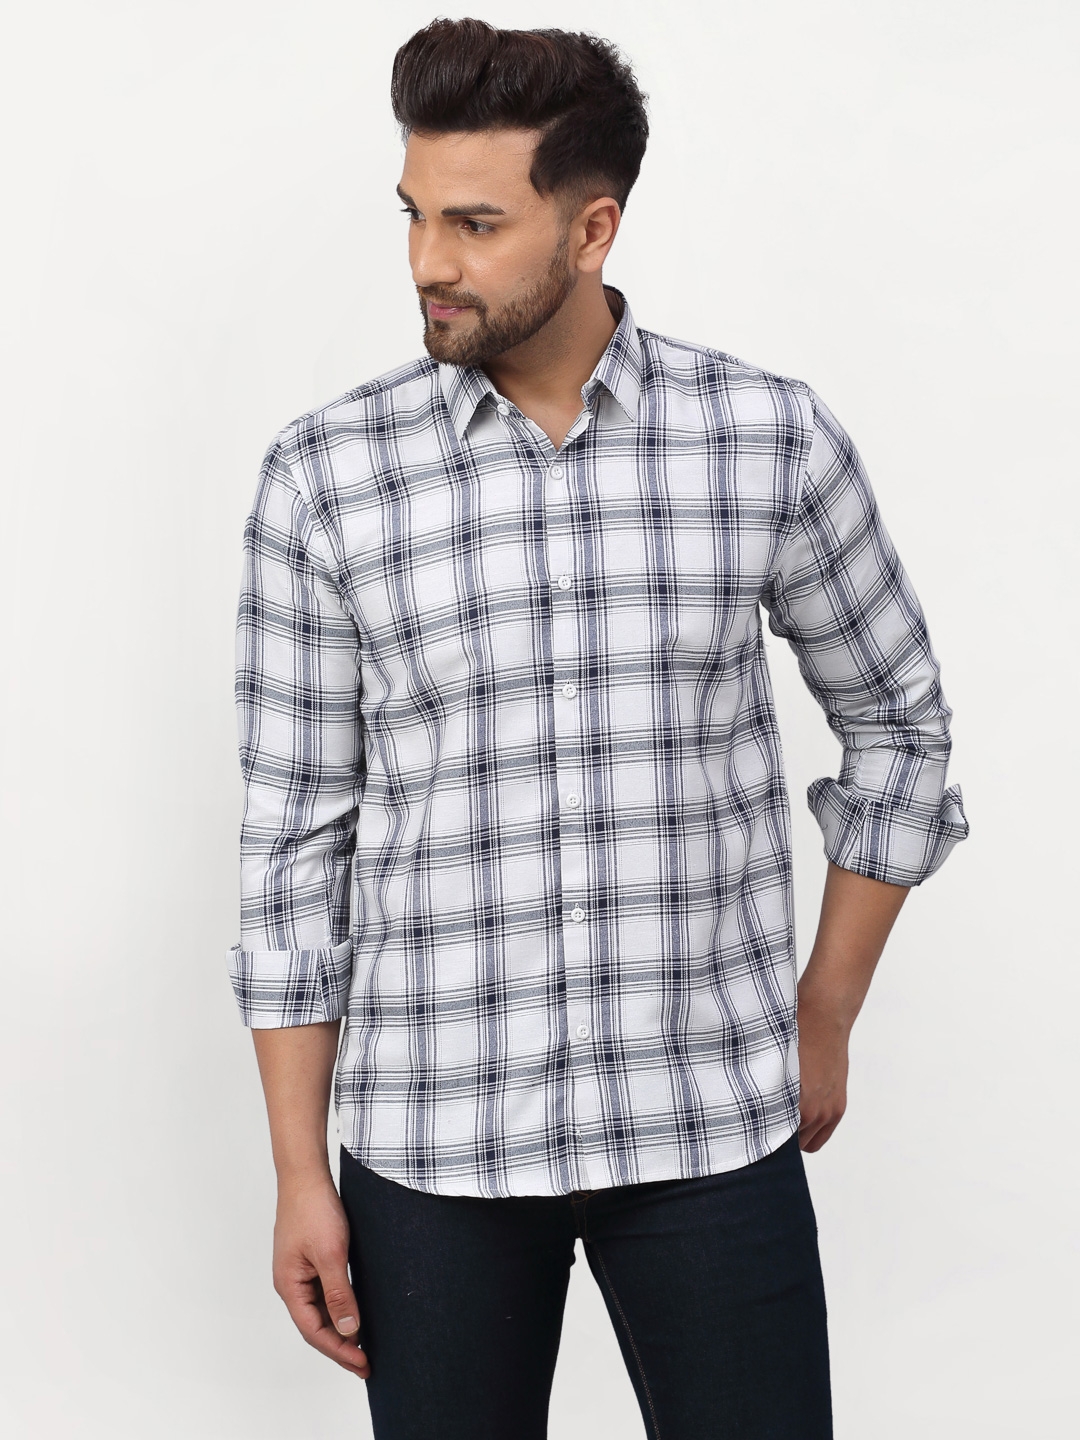 Men's Checked Casual Shirts